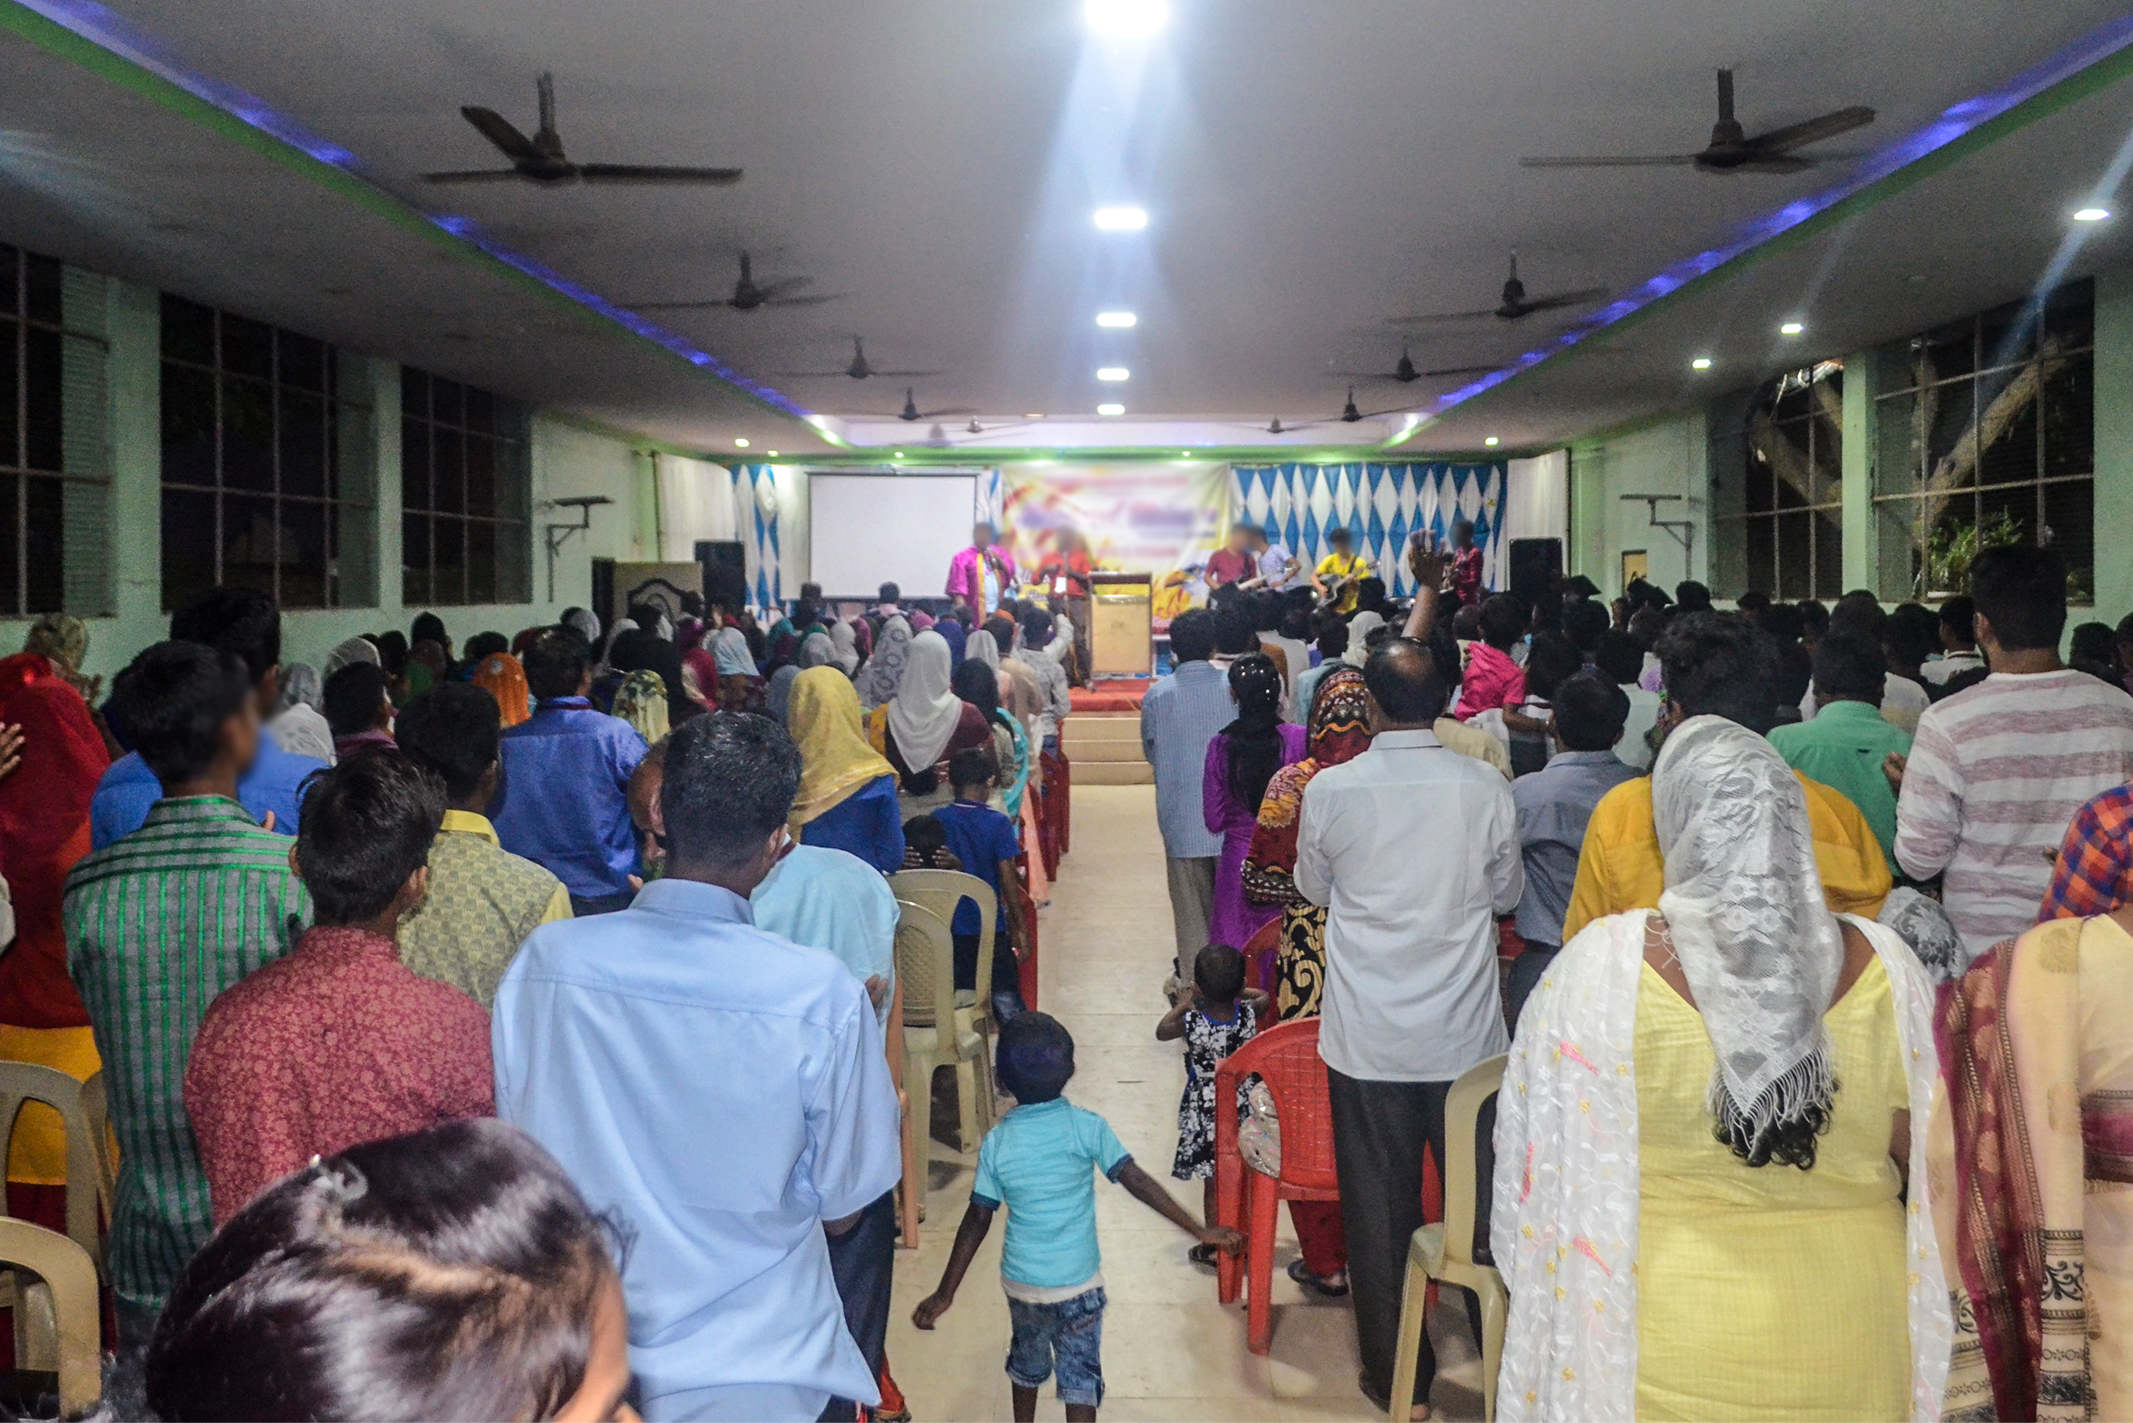 Christians in South Asia gathered together in a green room singing praises to God